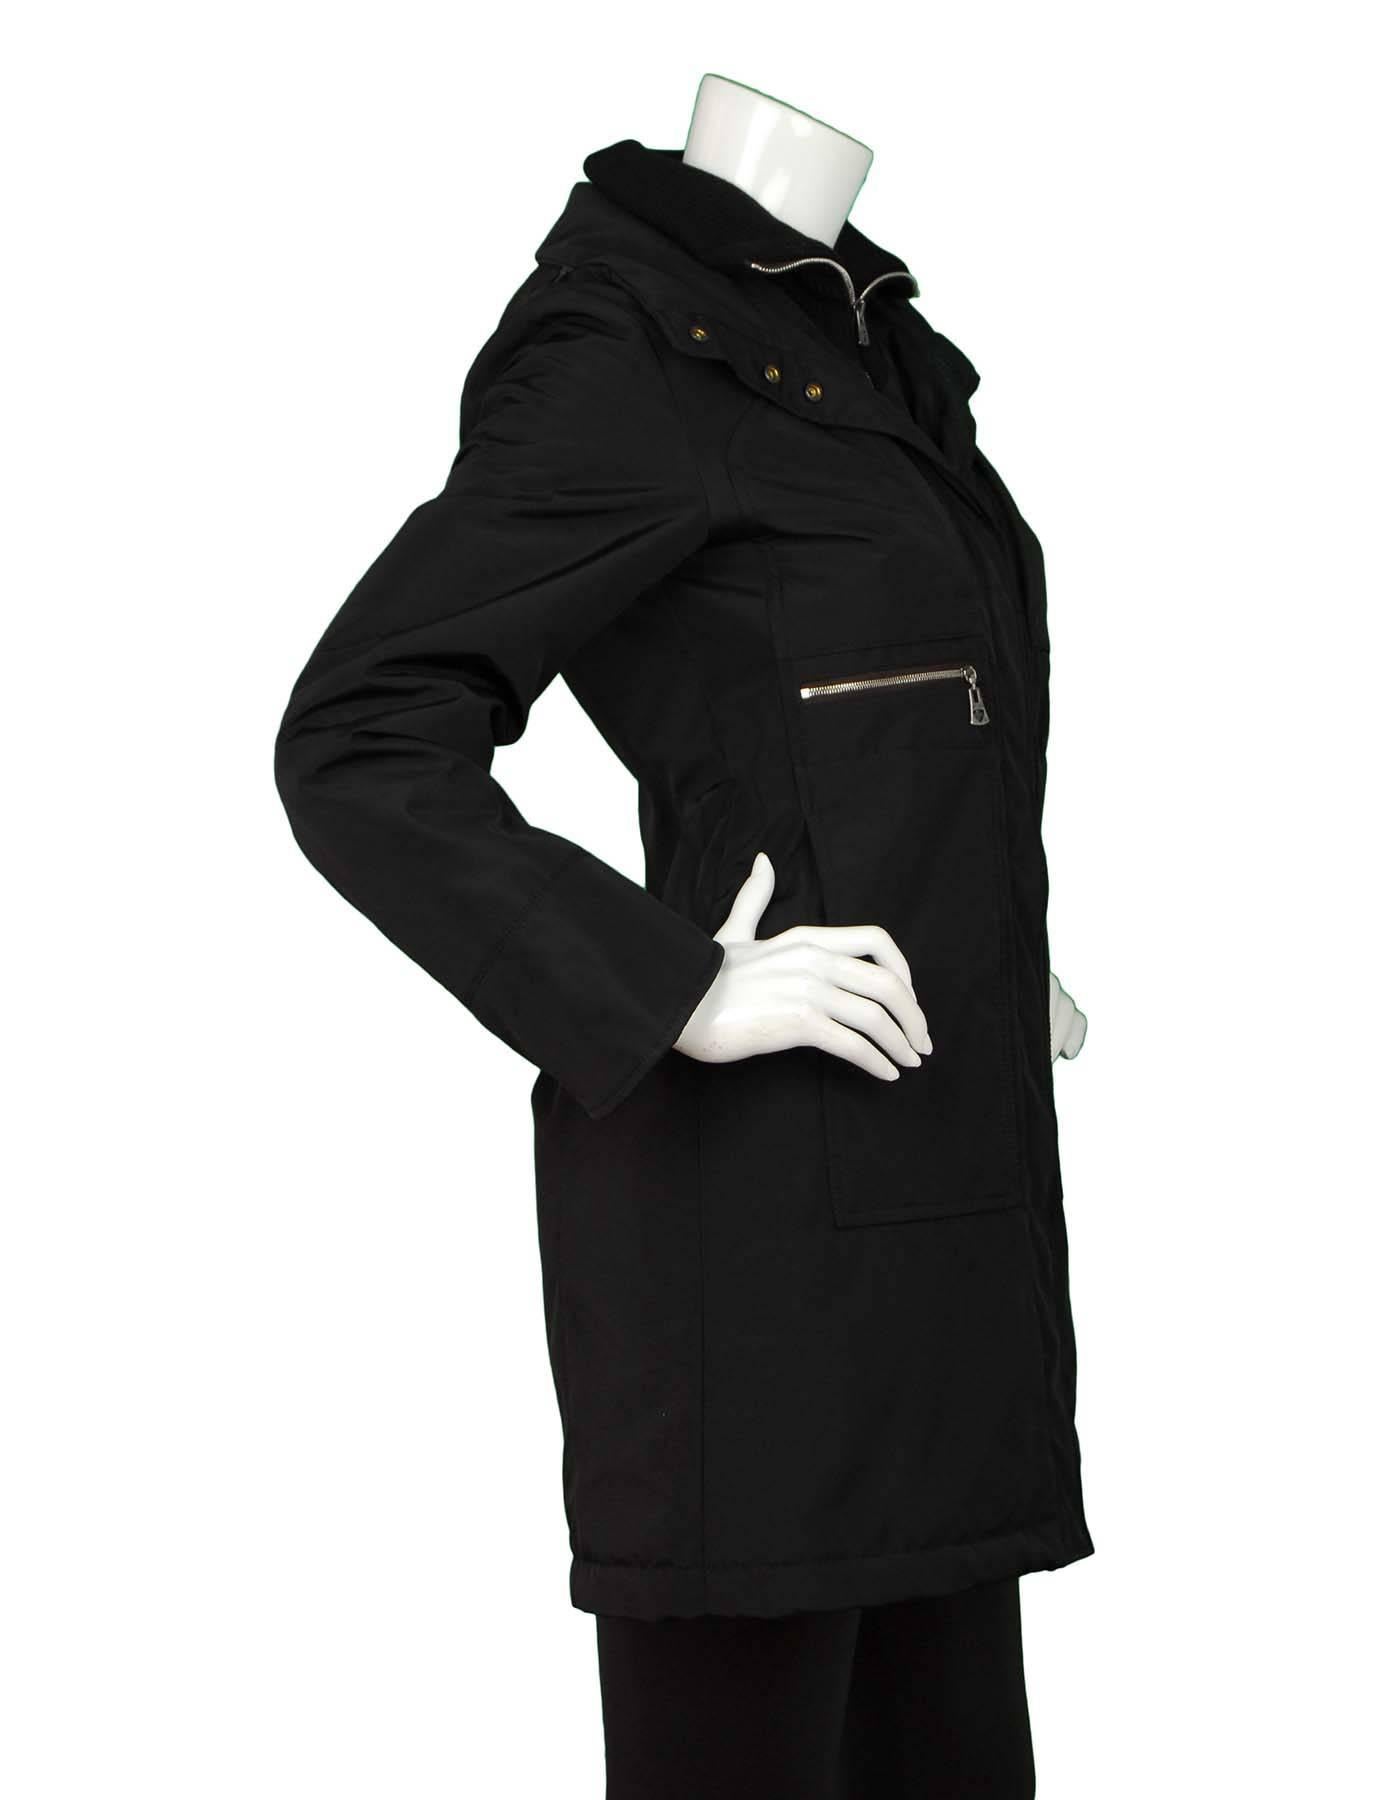 Postcard Black City Coat Sz 0
Features optional hood

Made In: Bulgaria
Color: Black
Composition: 65% Polyester, 30% nylon, 5% polyurethan
Lining: Brown 100% Nylon
Closure/Opening: Front zip and button closure
Exterior Pockets: Two hip